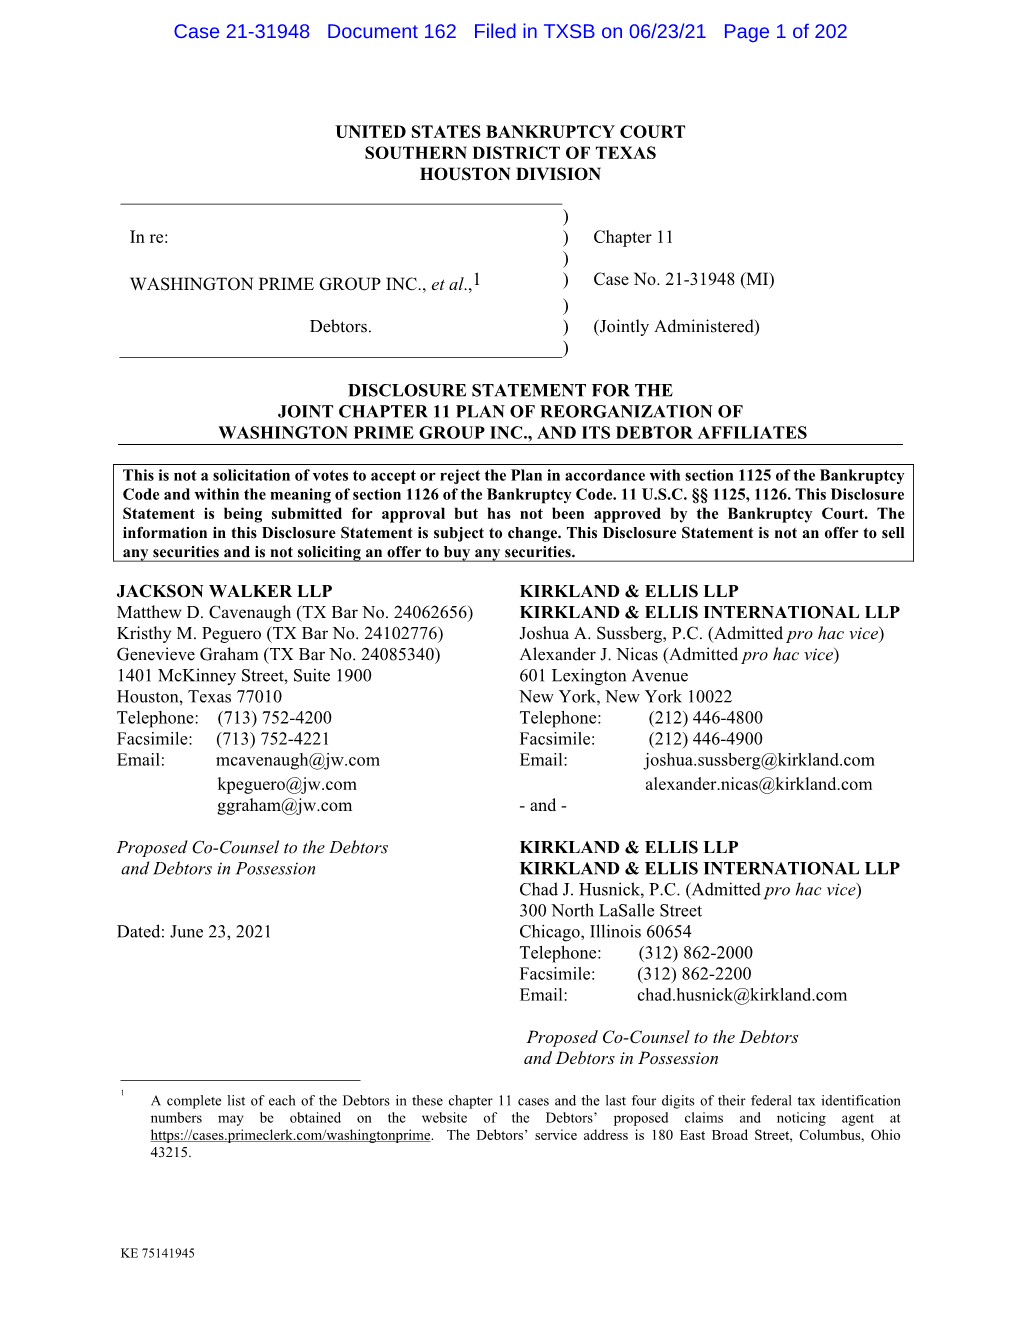 Case 21-31948 Document 162 Filed in TXSB on 06/23/21 Page 1 of 202